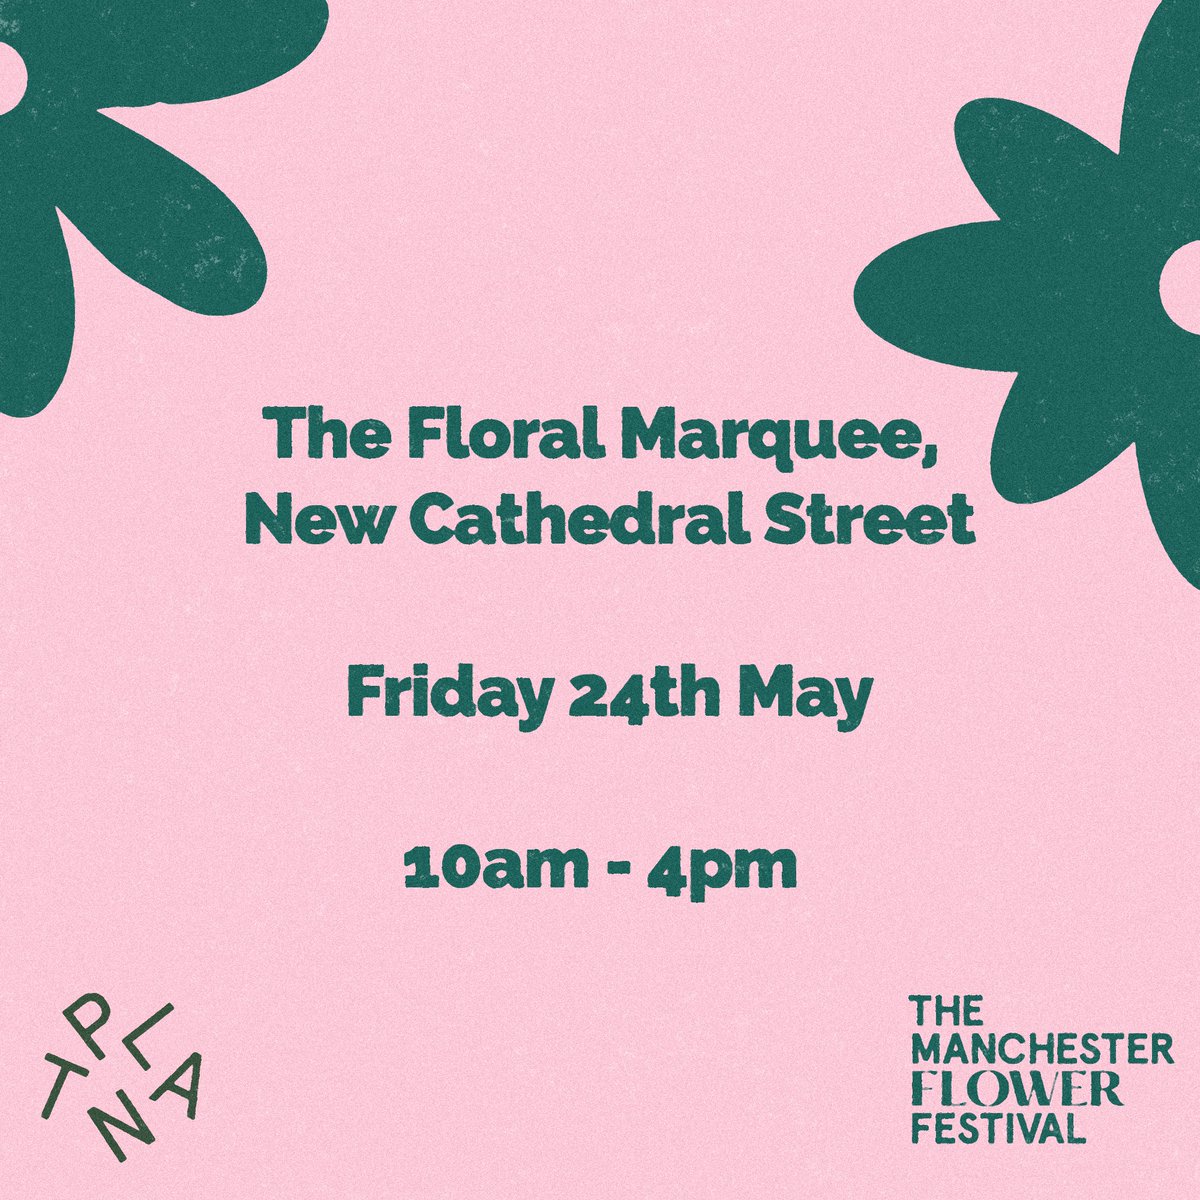 Heading to the @MCRFlowerFest this bank holiday weekend? We're very excited to be running a full day of family friendly workshops at the Floral Marquee on the Friday. Come say hello and get stuck in with wildflower seed bomb making, rock painting, sunflower planting & more...